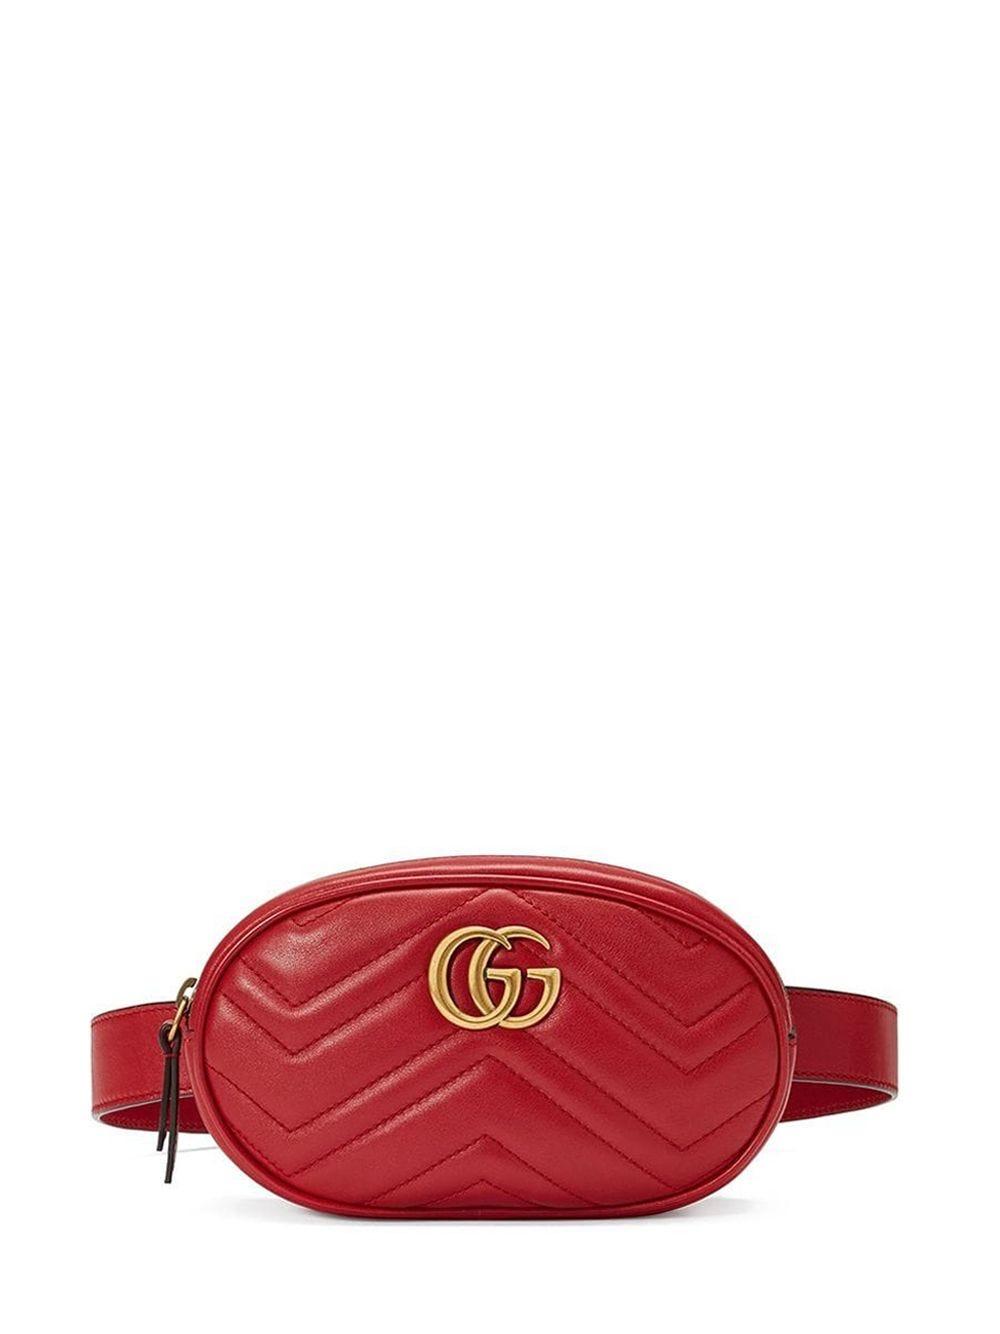 Gucci GG Marmont Belt Bag Rosso in Red | Lyst